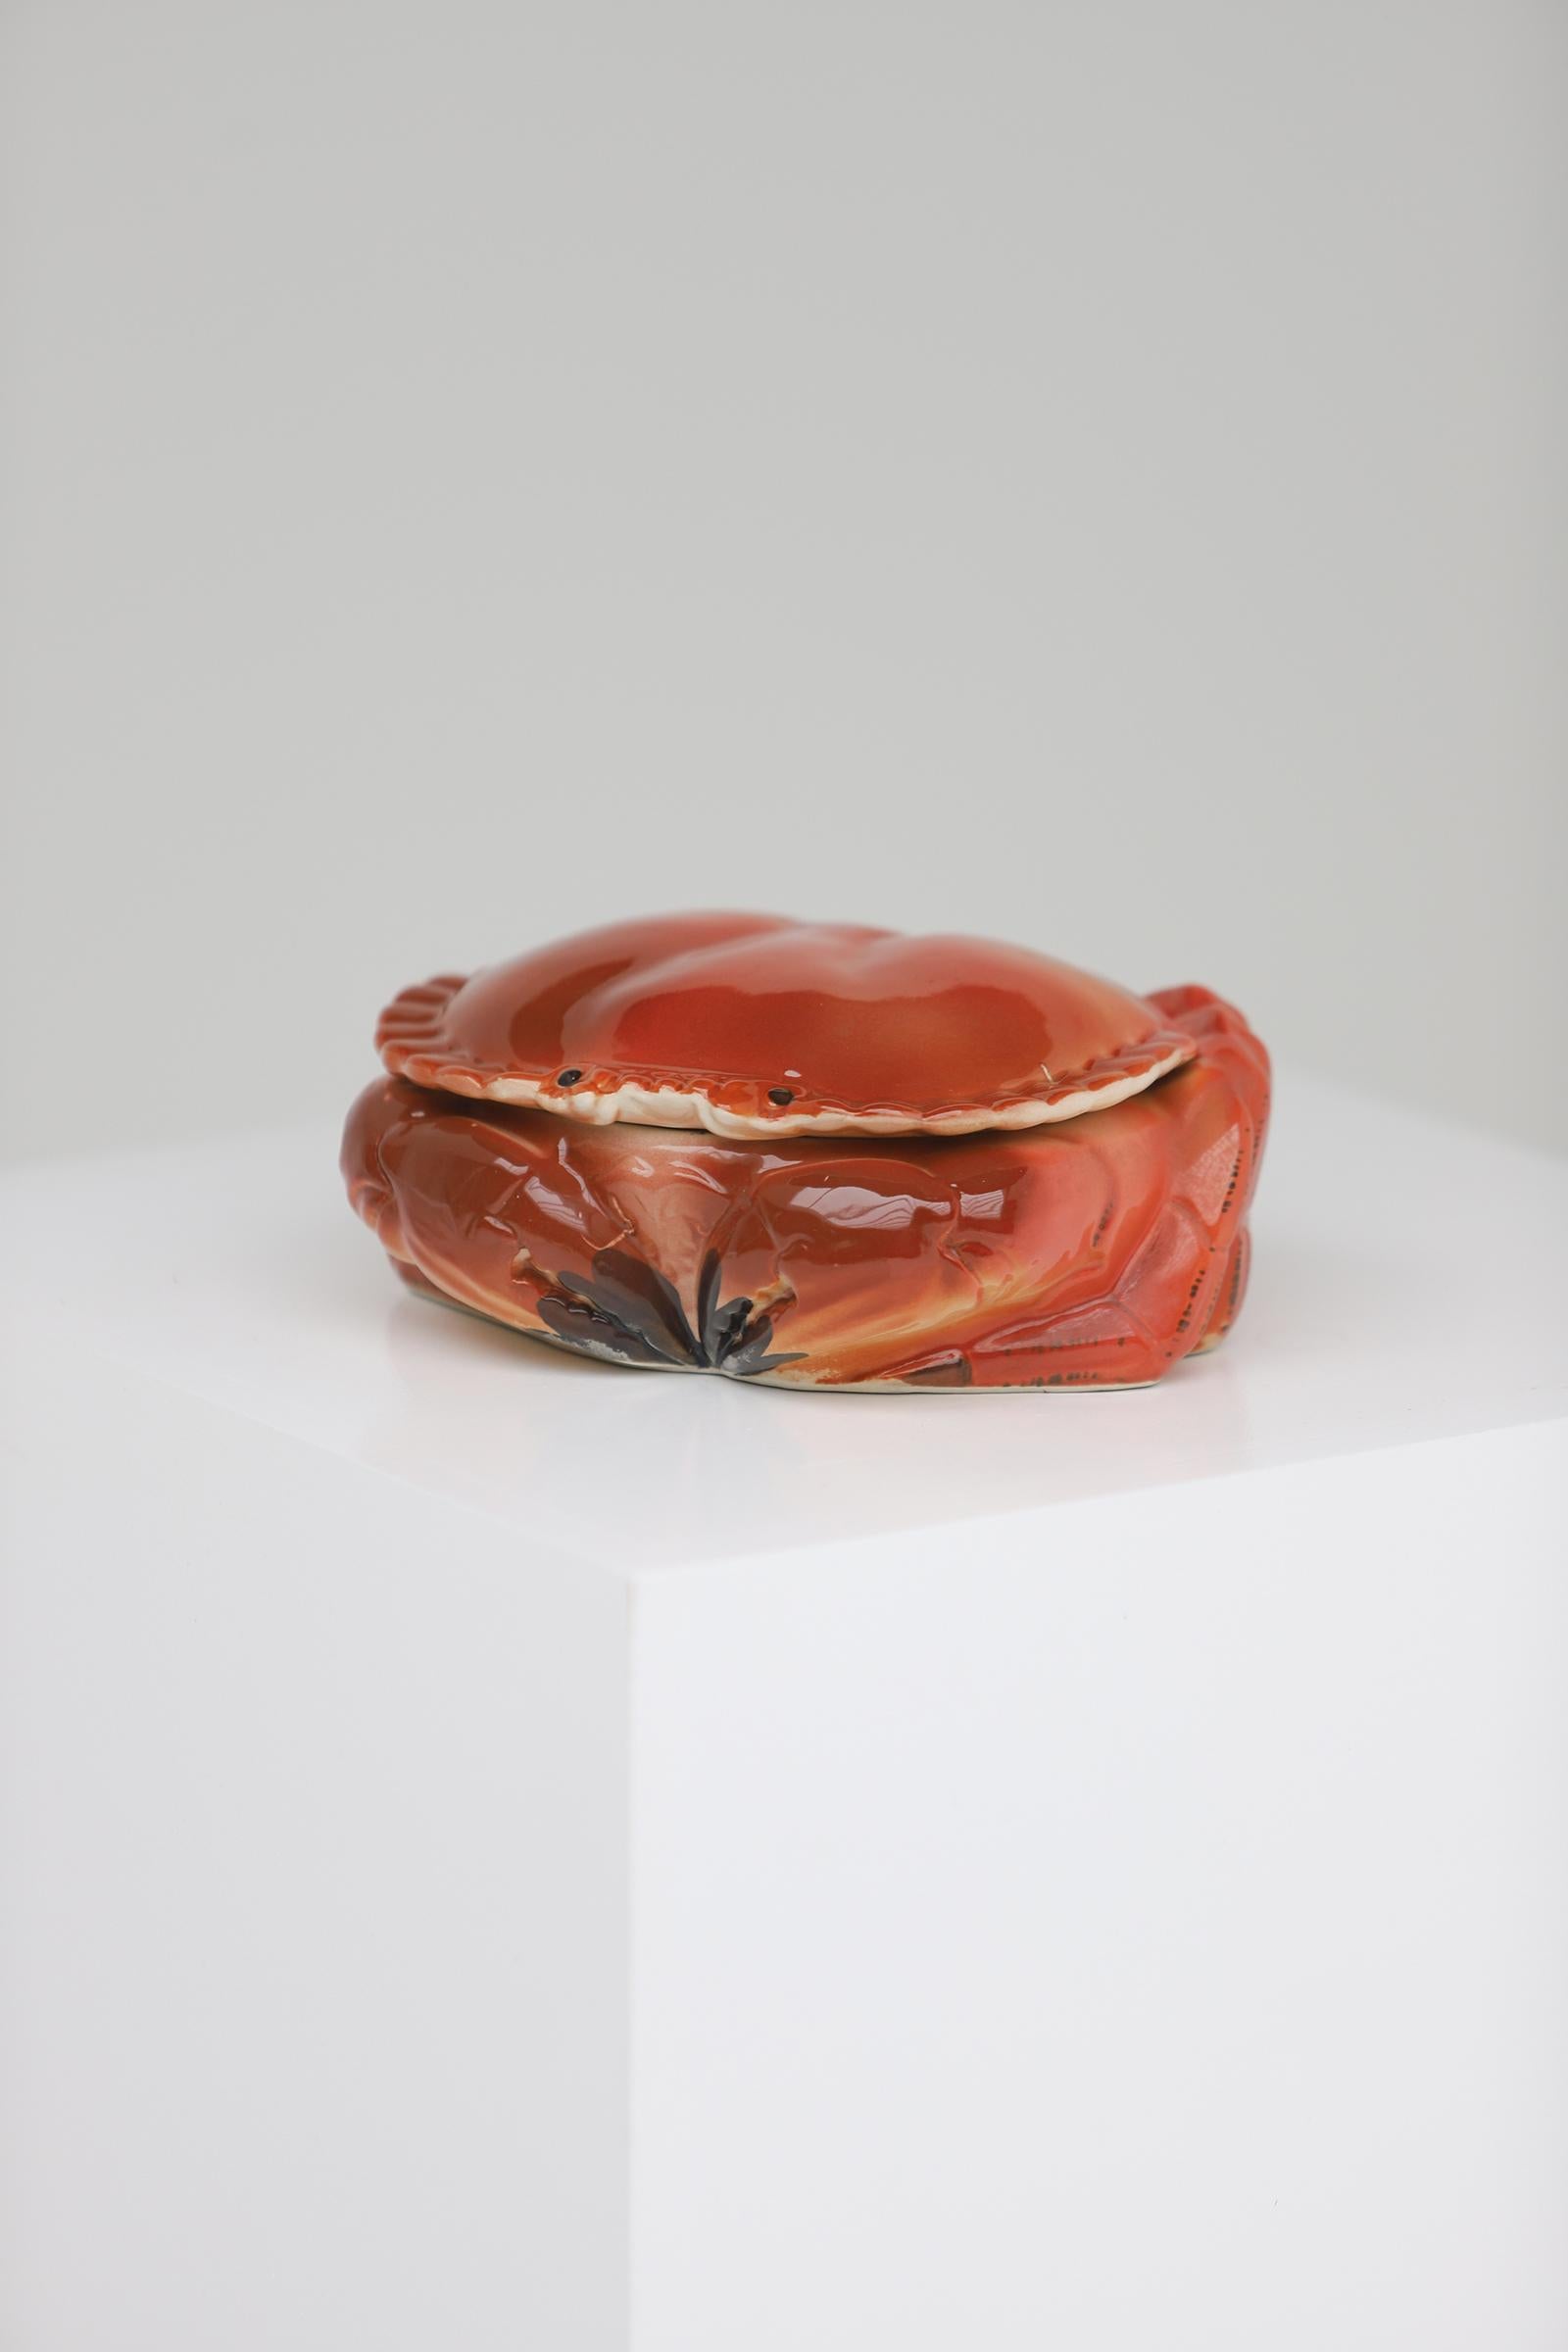 Handpainted crab terrine by Michel Caugant dating from the 1950s.
Michel Caugant was the son of a French pâté maker, he designed terrines for his father's factory. The terrine was manufactured by Herberstein, Portugal.
Signed 